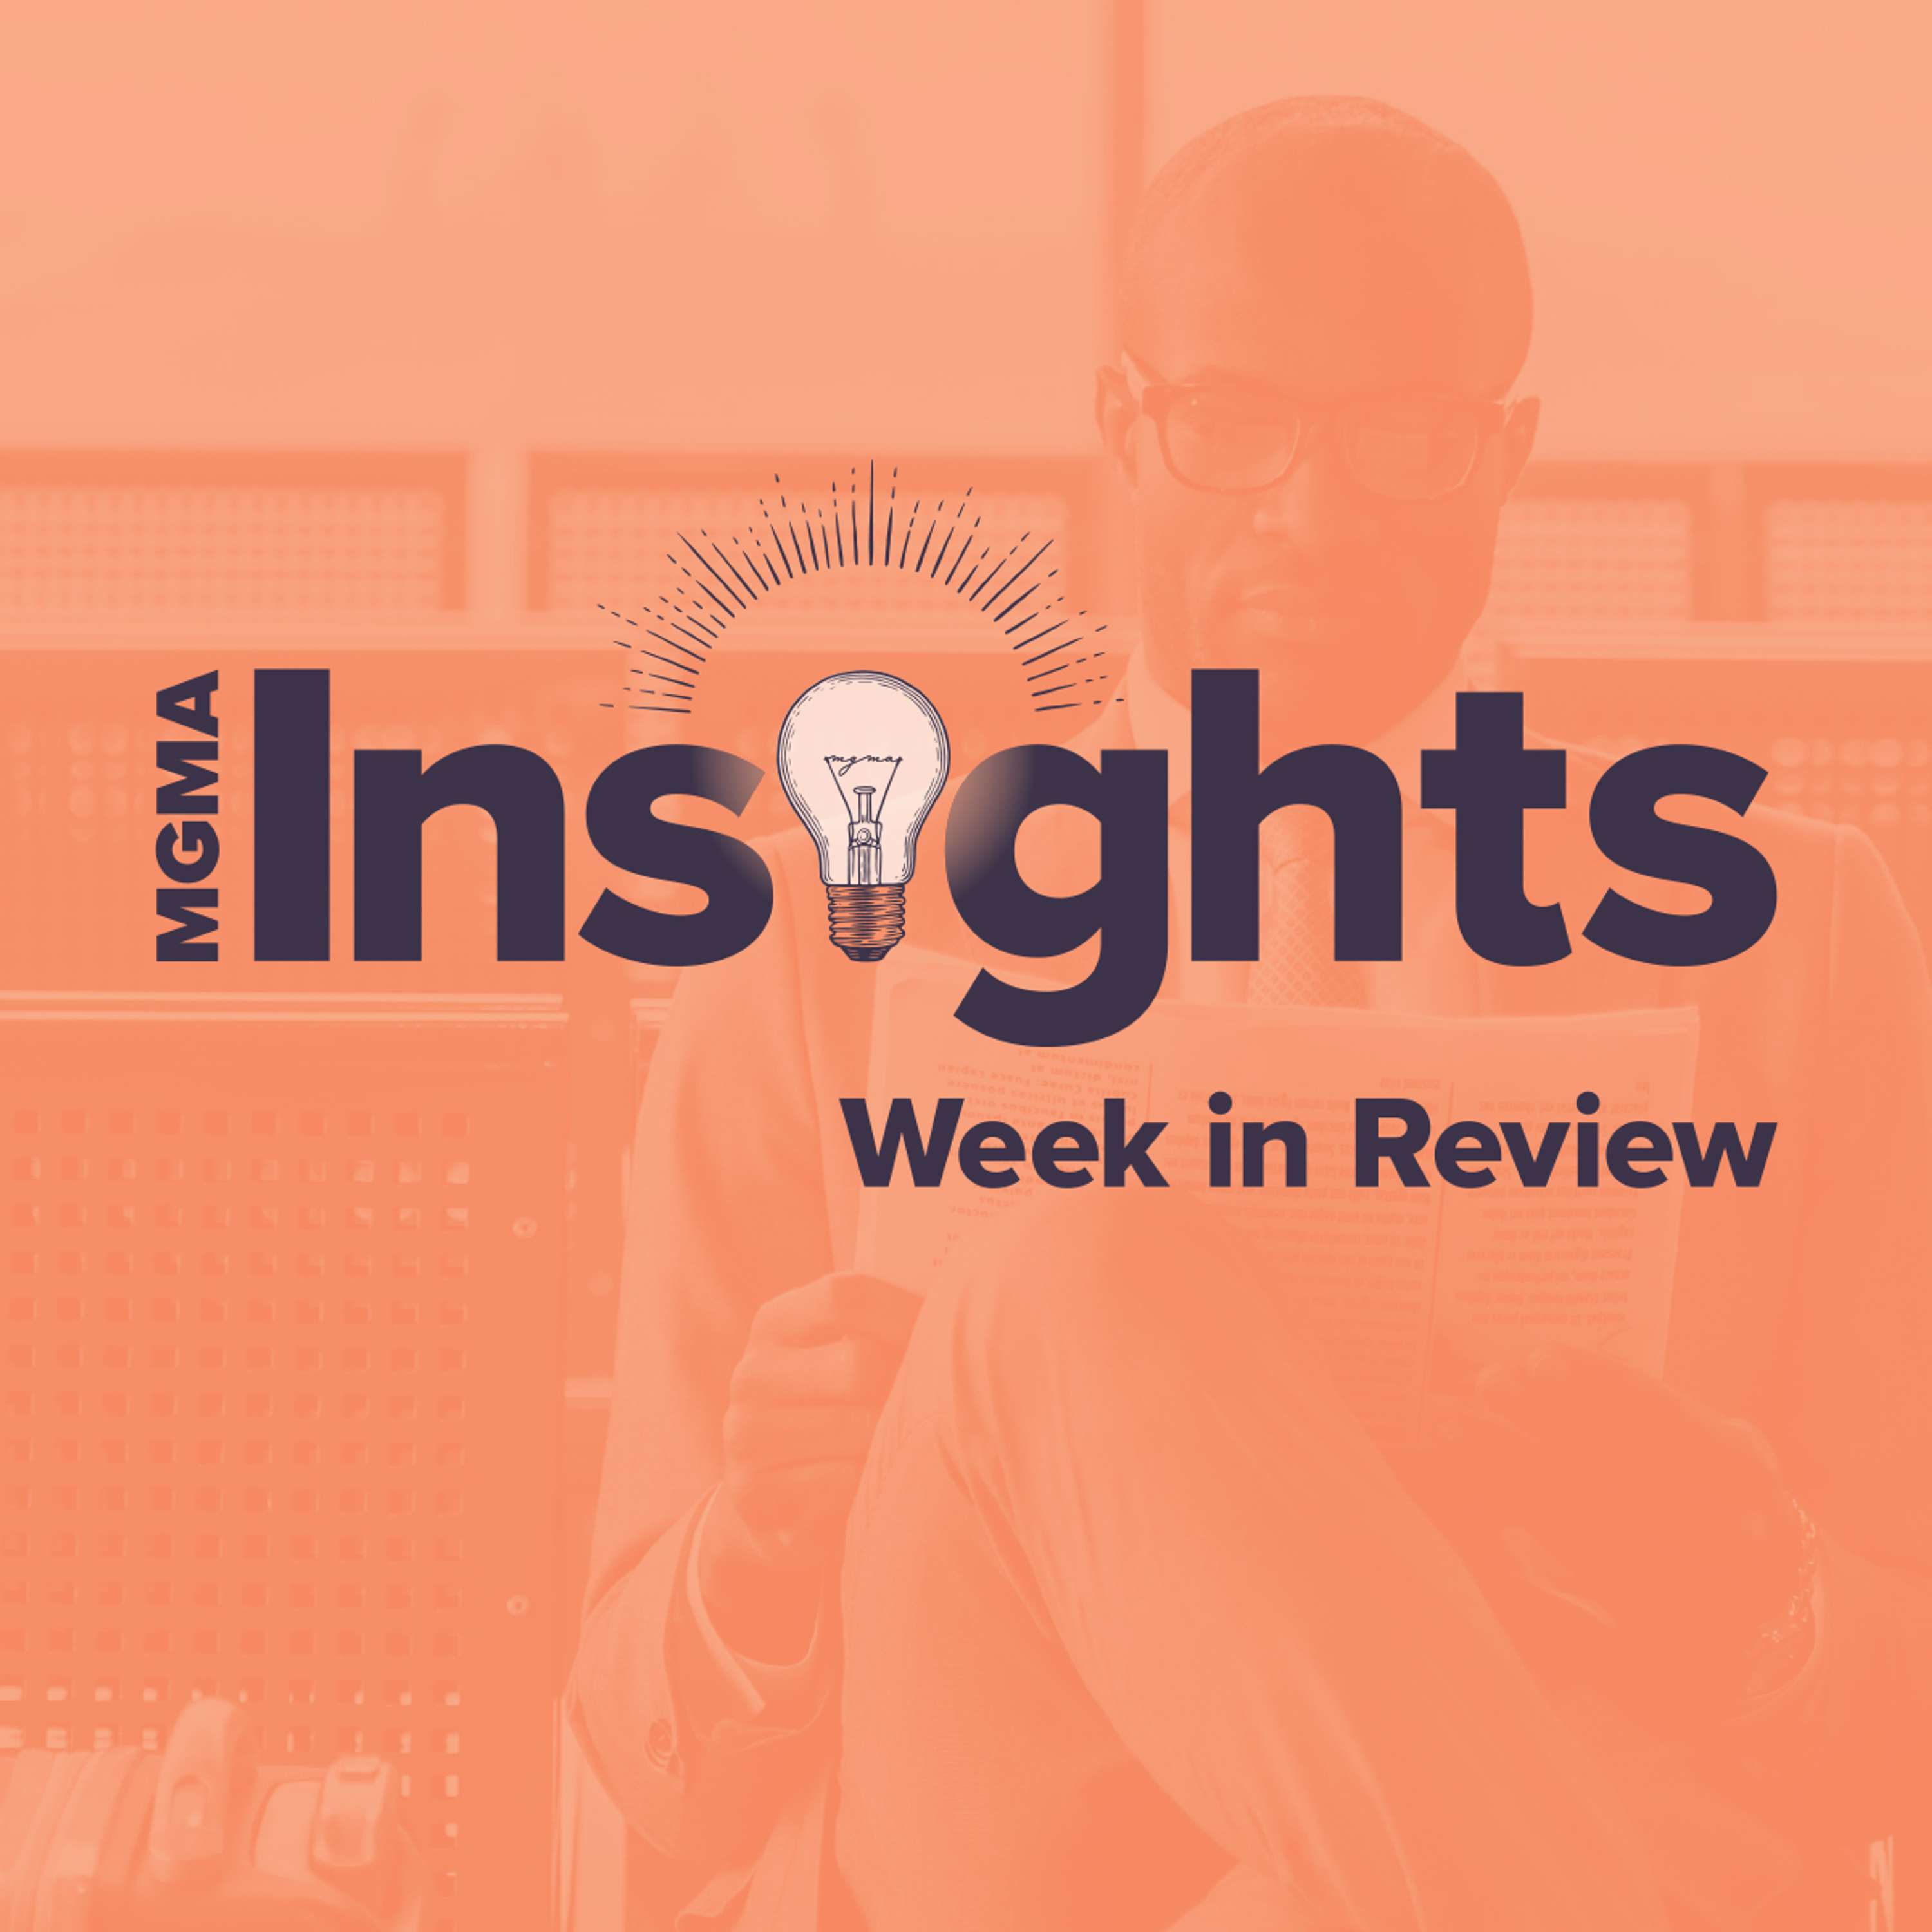 MGMA Week in Review: Breach Notifications, Primary Care Compensation, and Medical Debt Impact